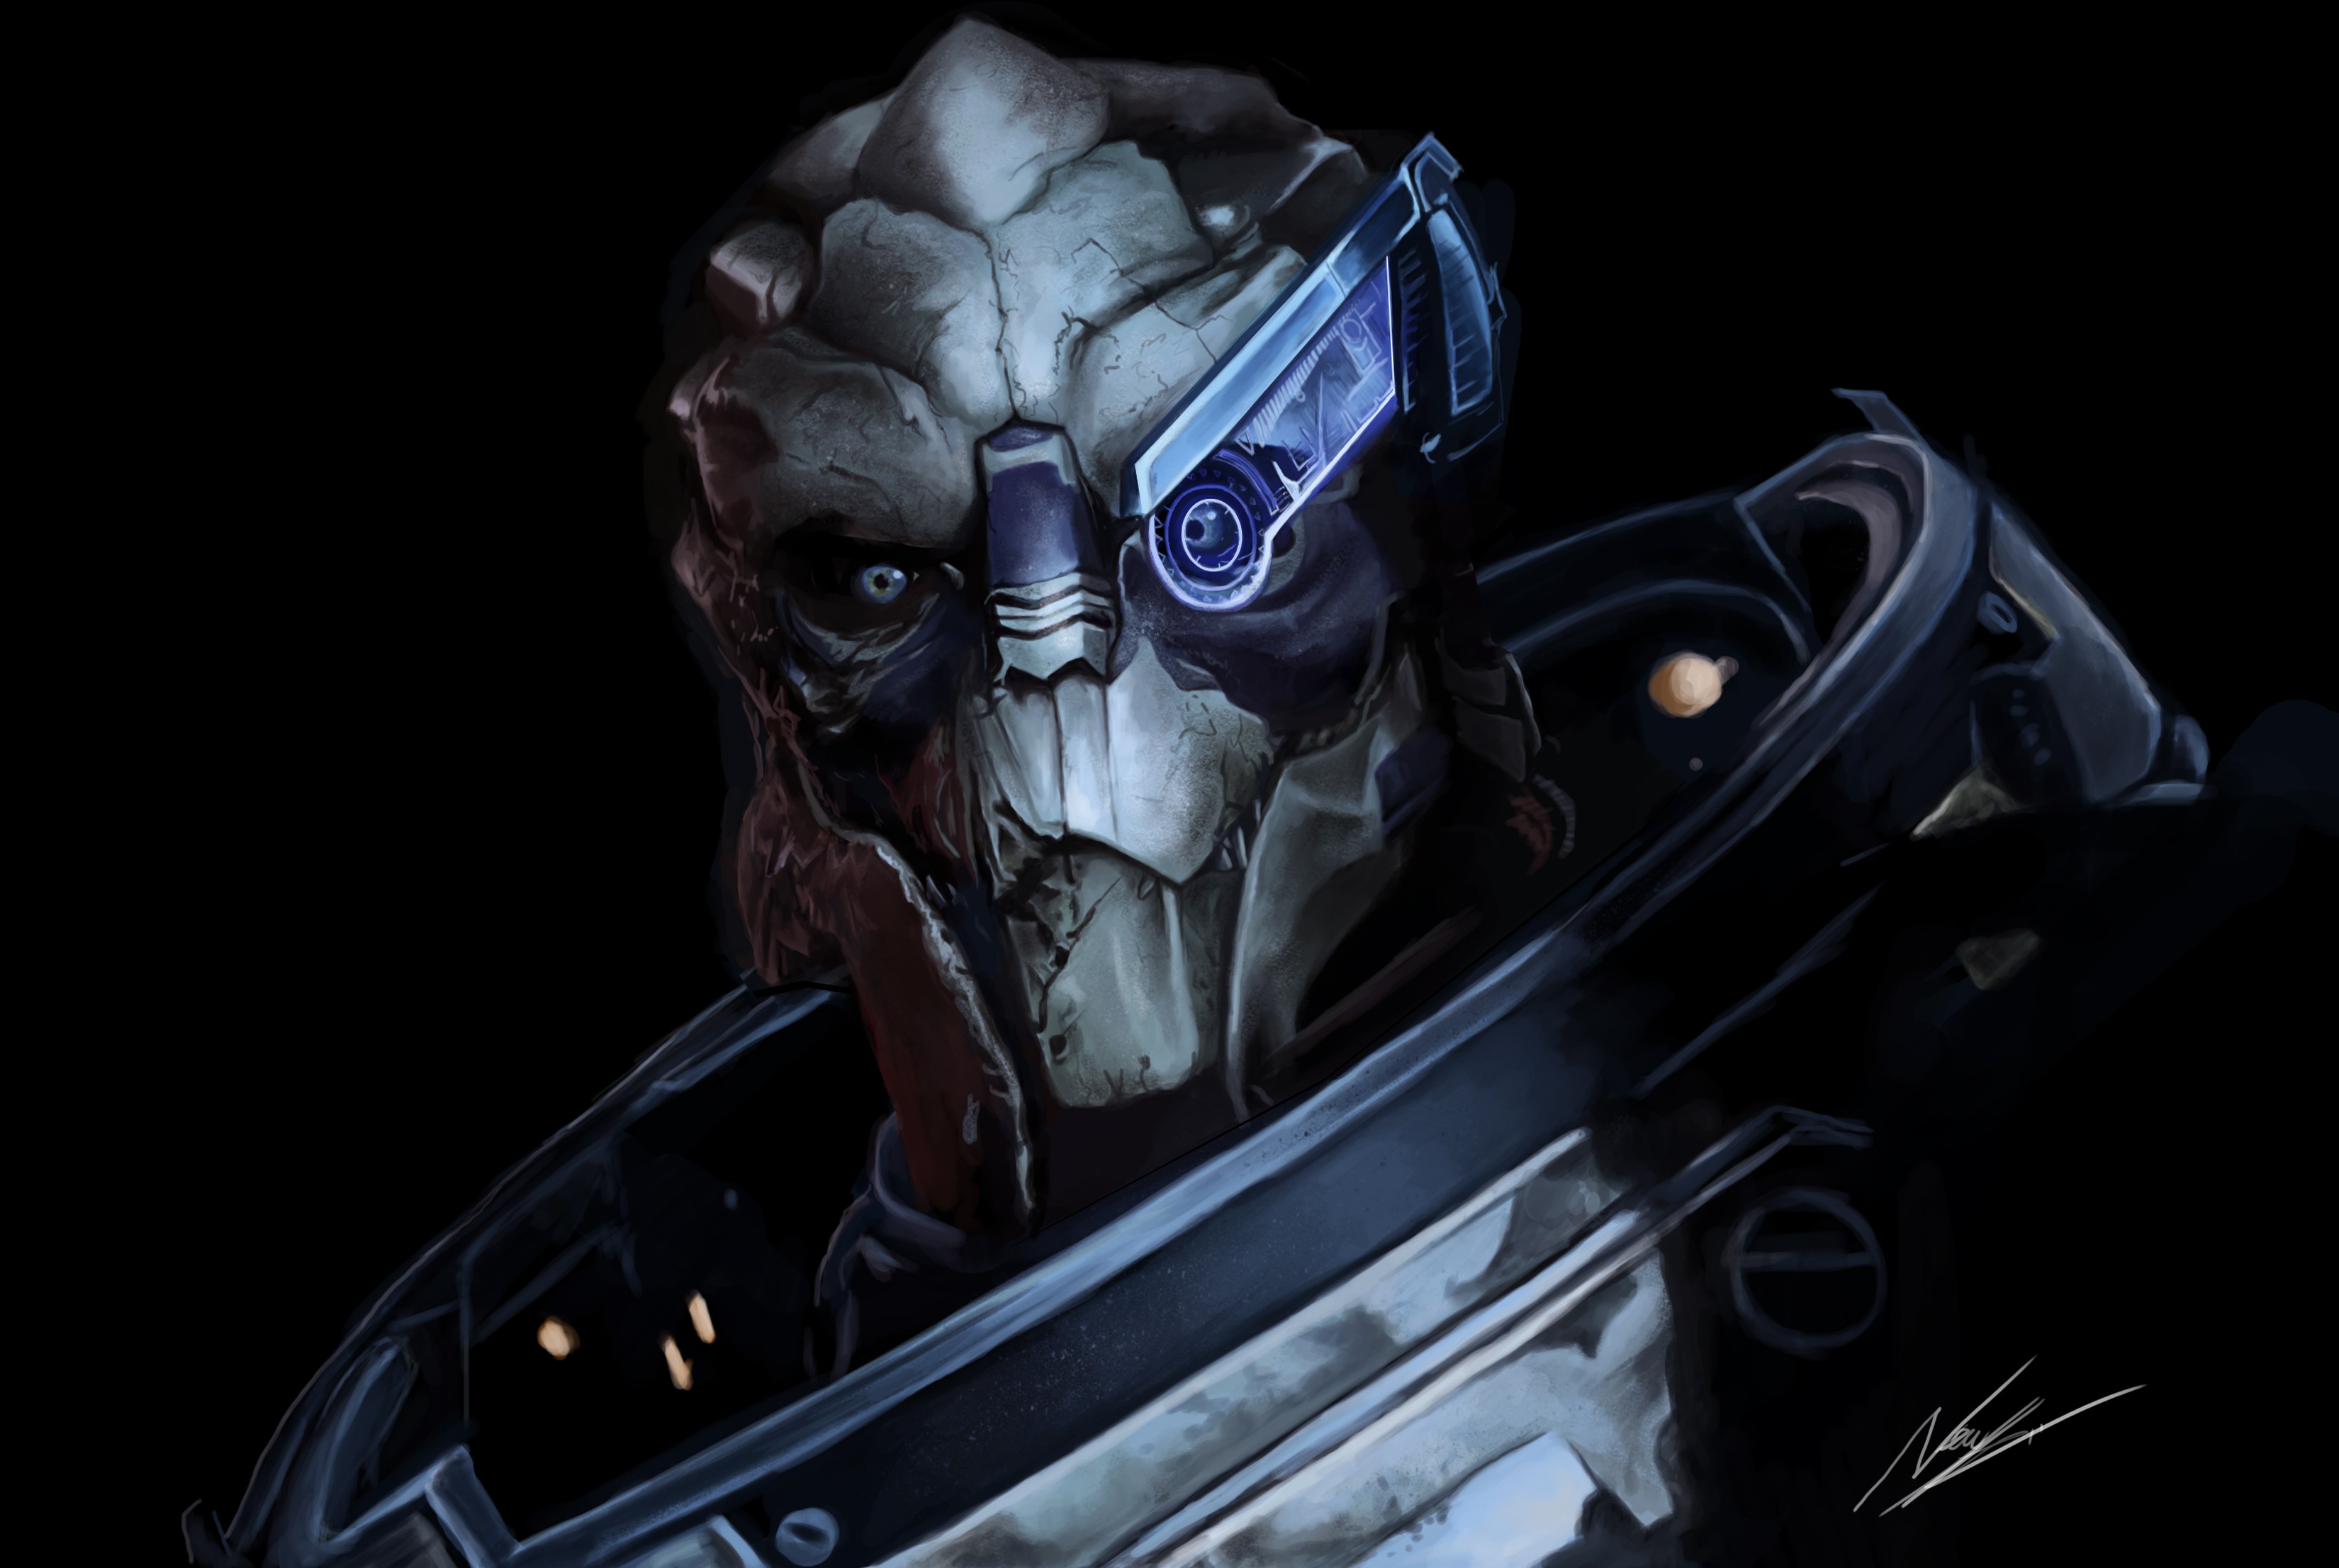 General 3300x2212 Mass Effect Garrus Vakarian artwork video games PC gaming video game characters science fiction video game art